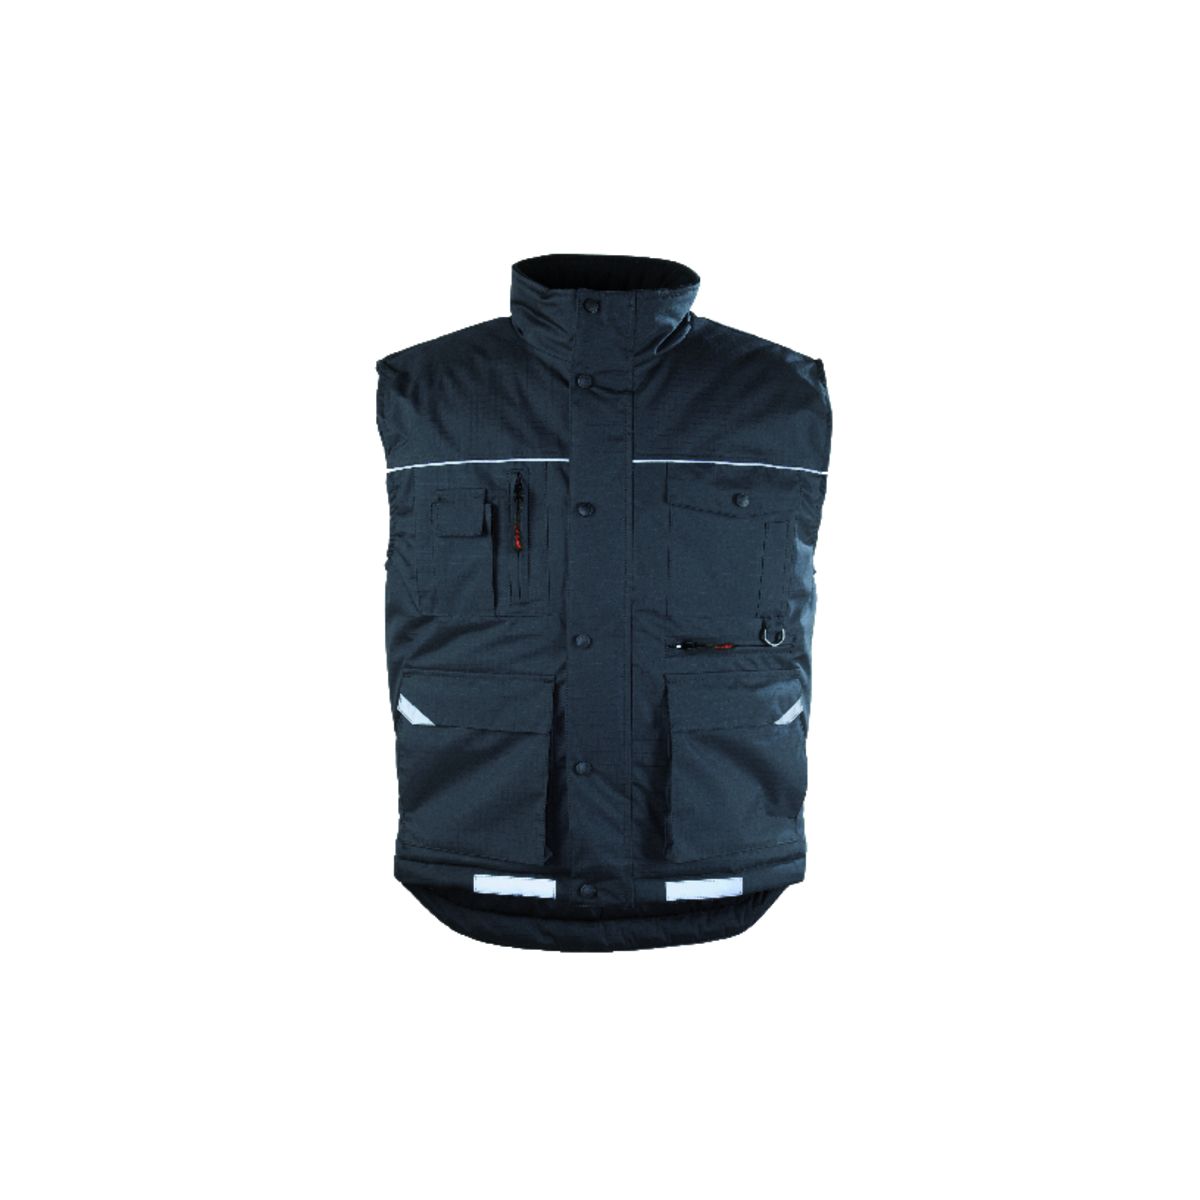 RIPSTOP Gilet Froid noir, Polyester Risptop + Matelassage 180g/m² - Coverguard - Taille S 0